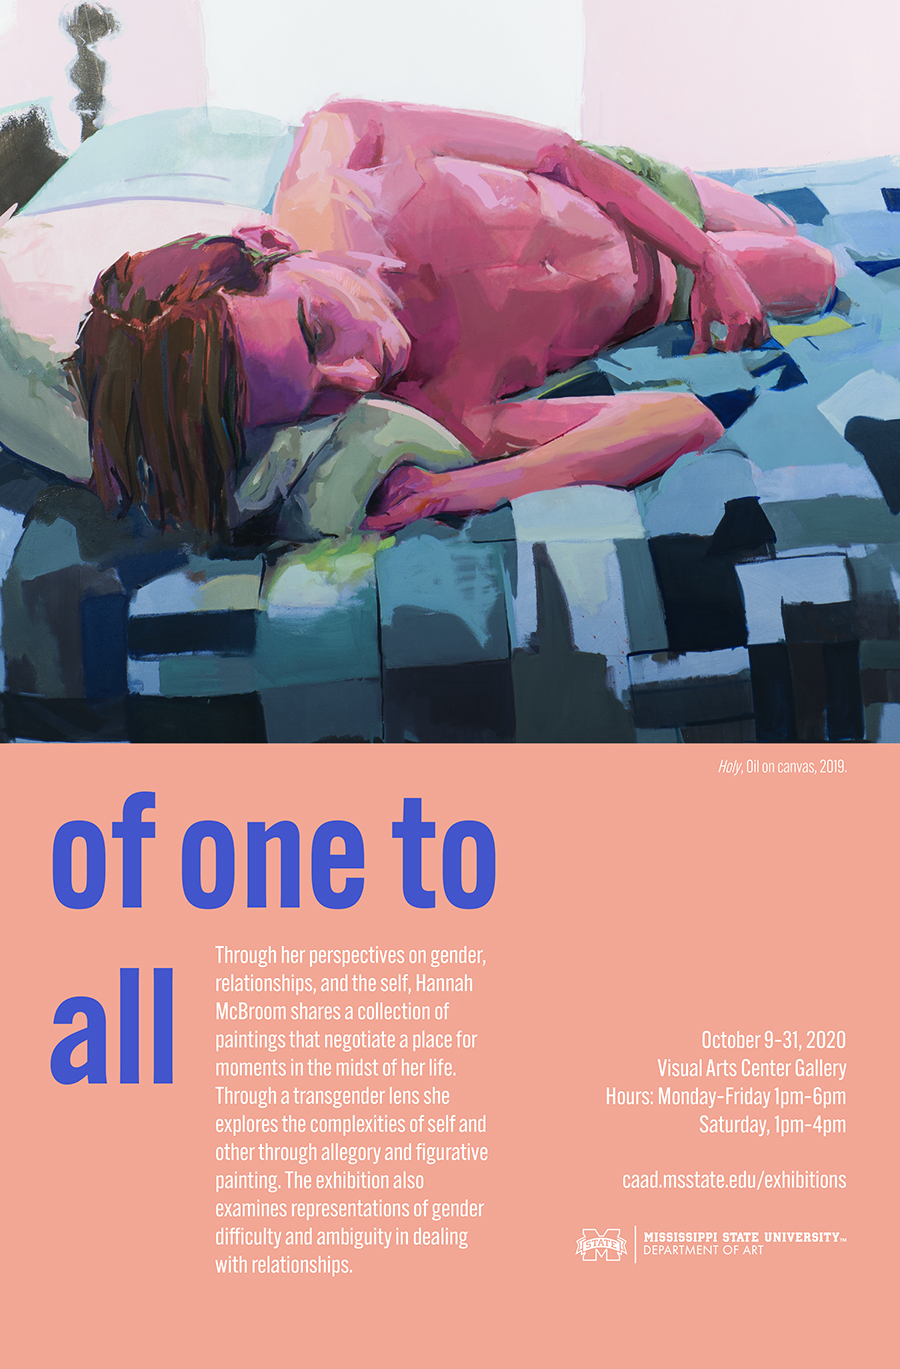 Poster image with painting of figure lying on a bed over the words of one to all.